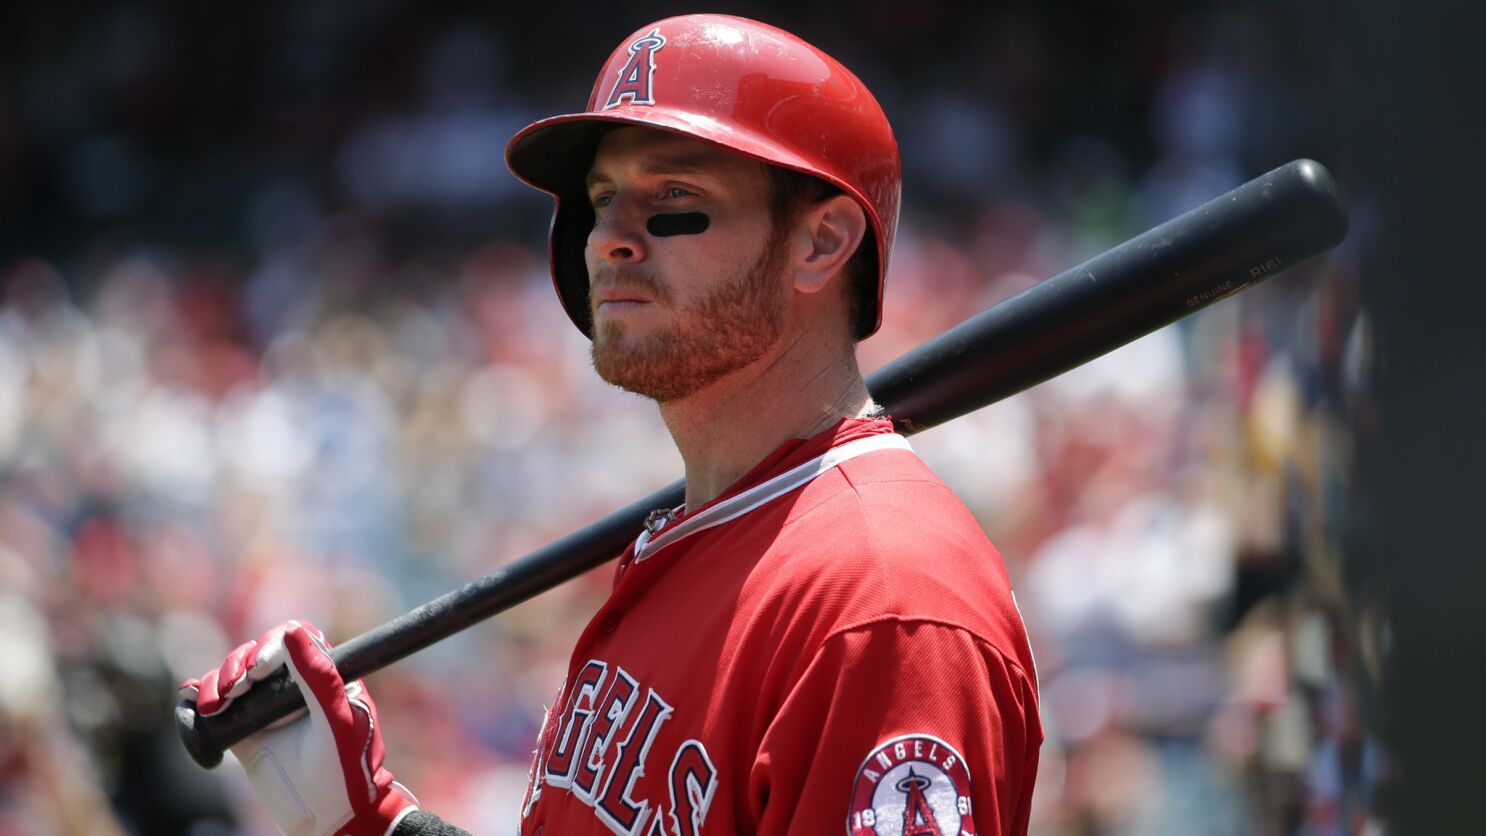 Another battle possible over Josh Hamilton - Los Angeles Times